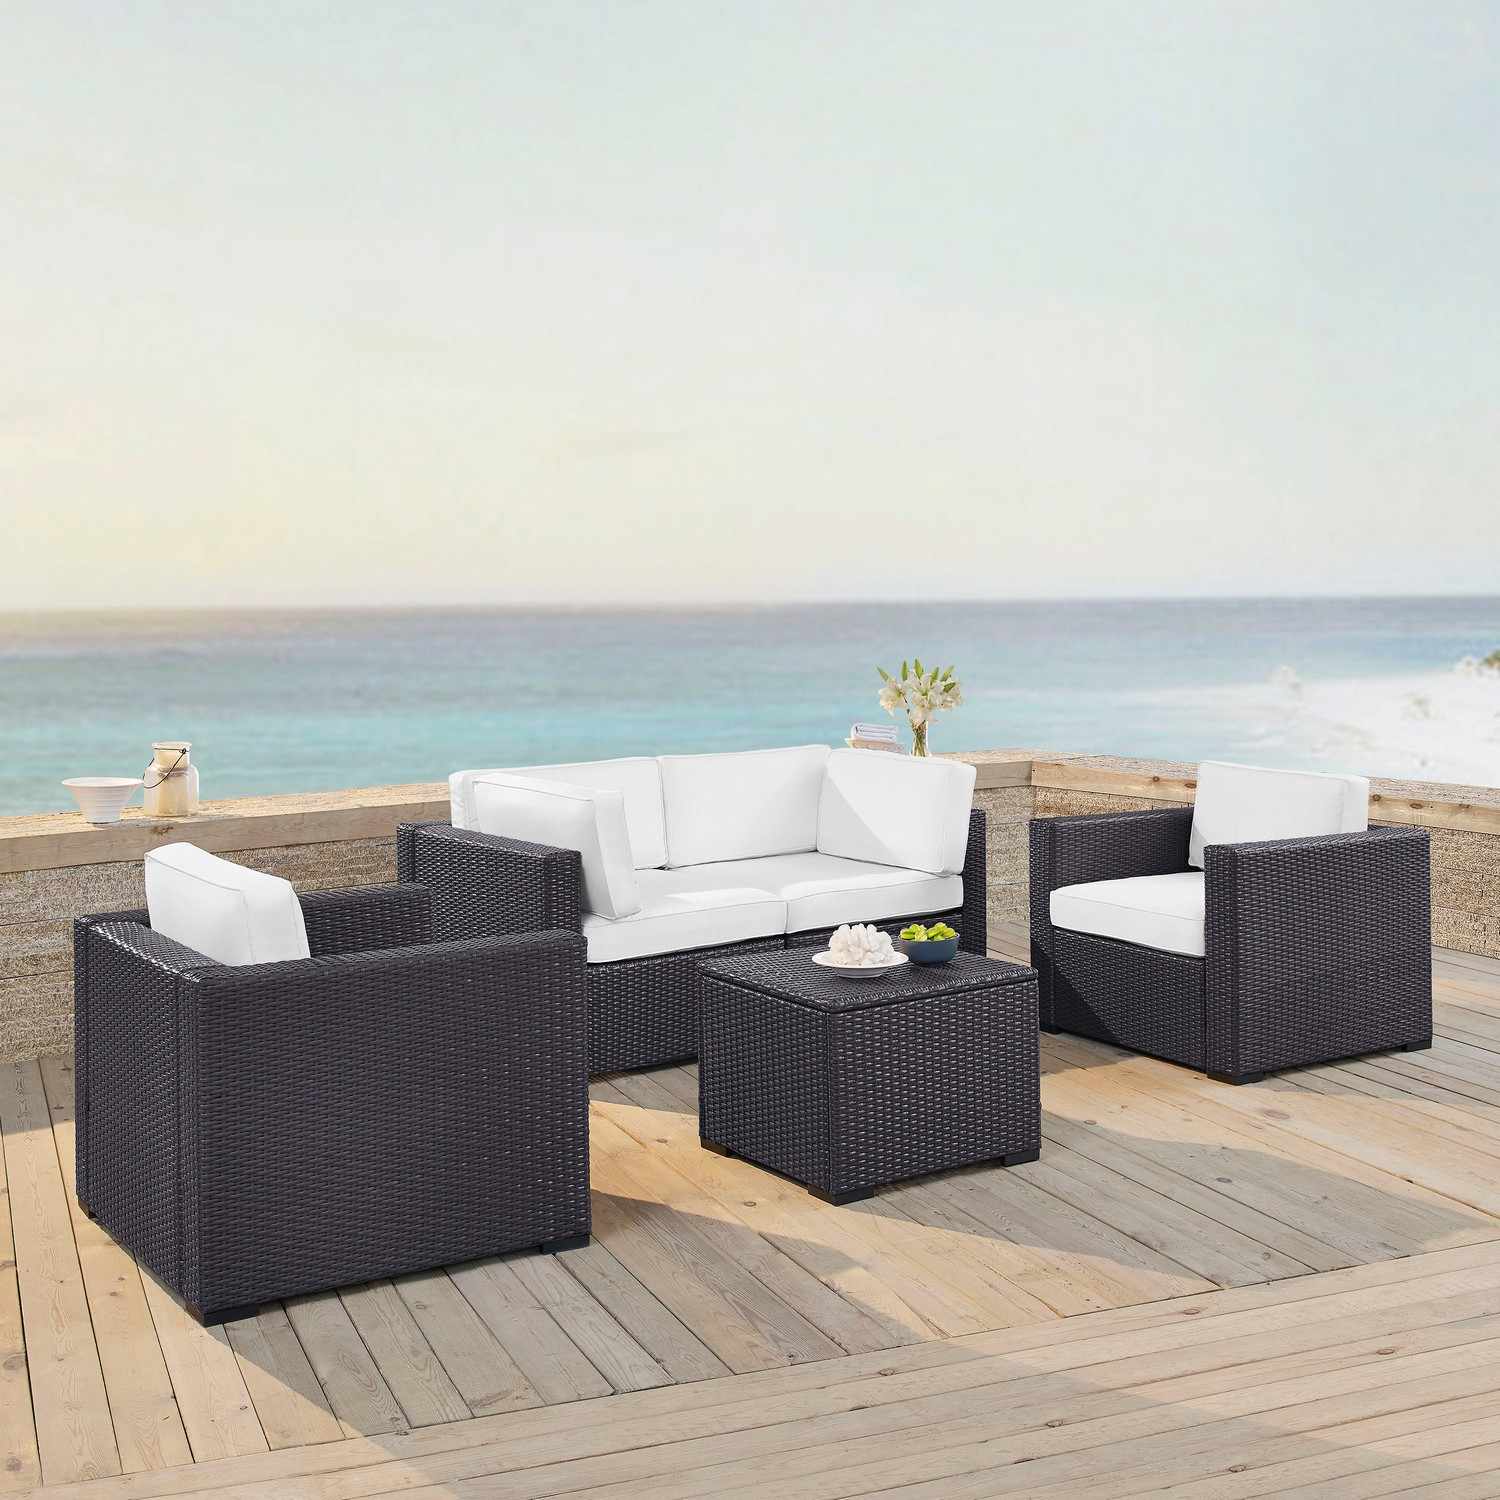 Crosley Biscayne 5-PC Outdoor Wicker Sectional Set - 2 Armchairs, 2 Corner Chair, Coffee Table - White/Brown